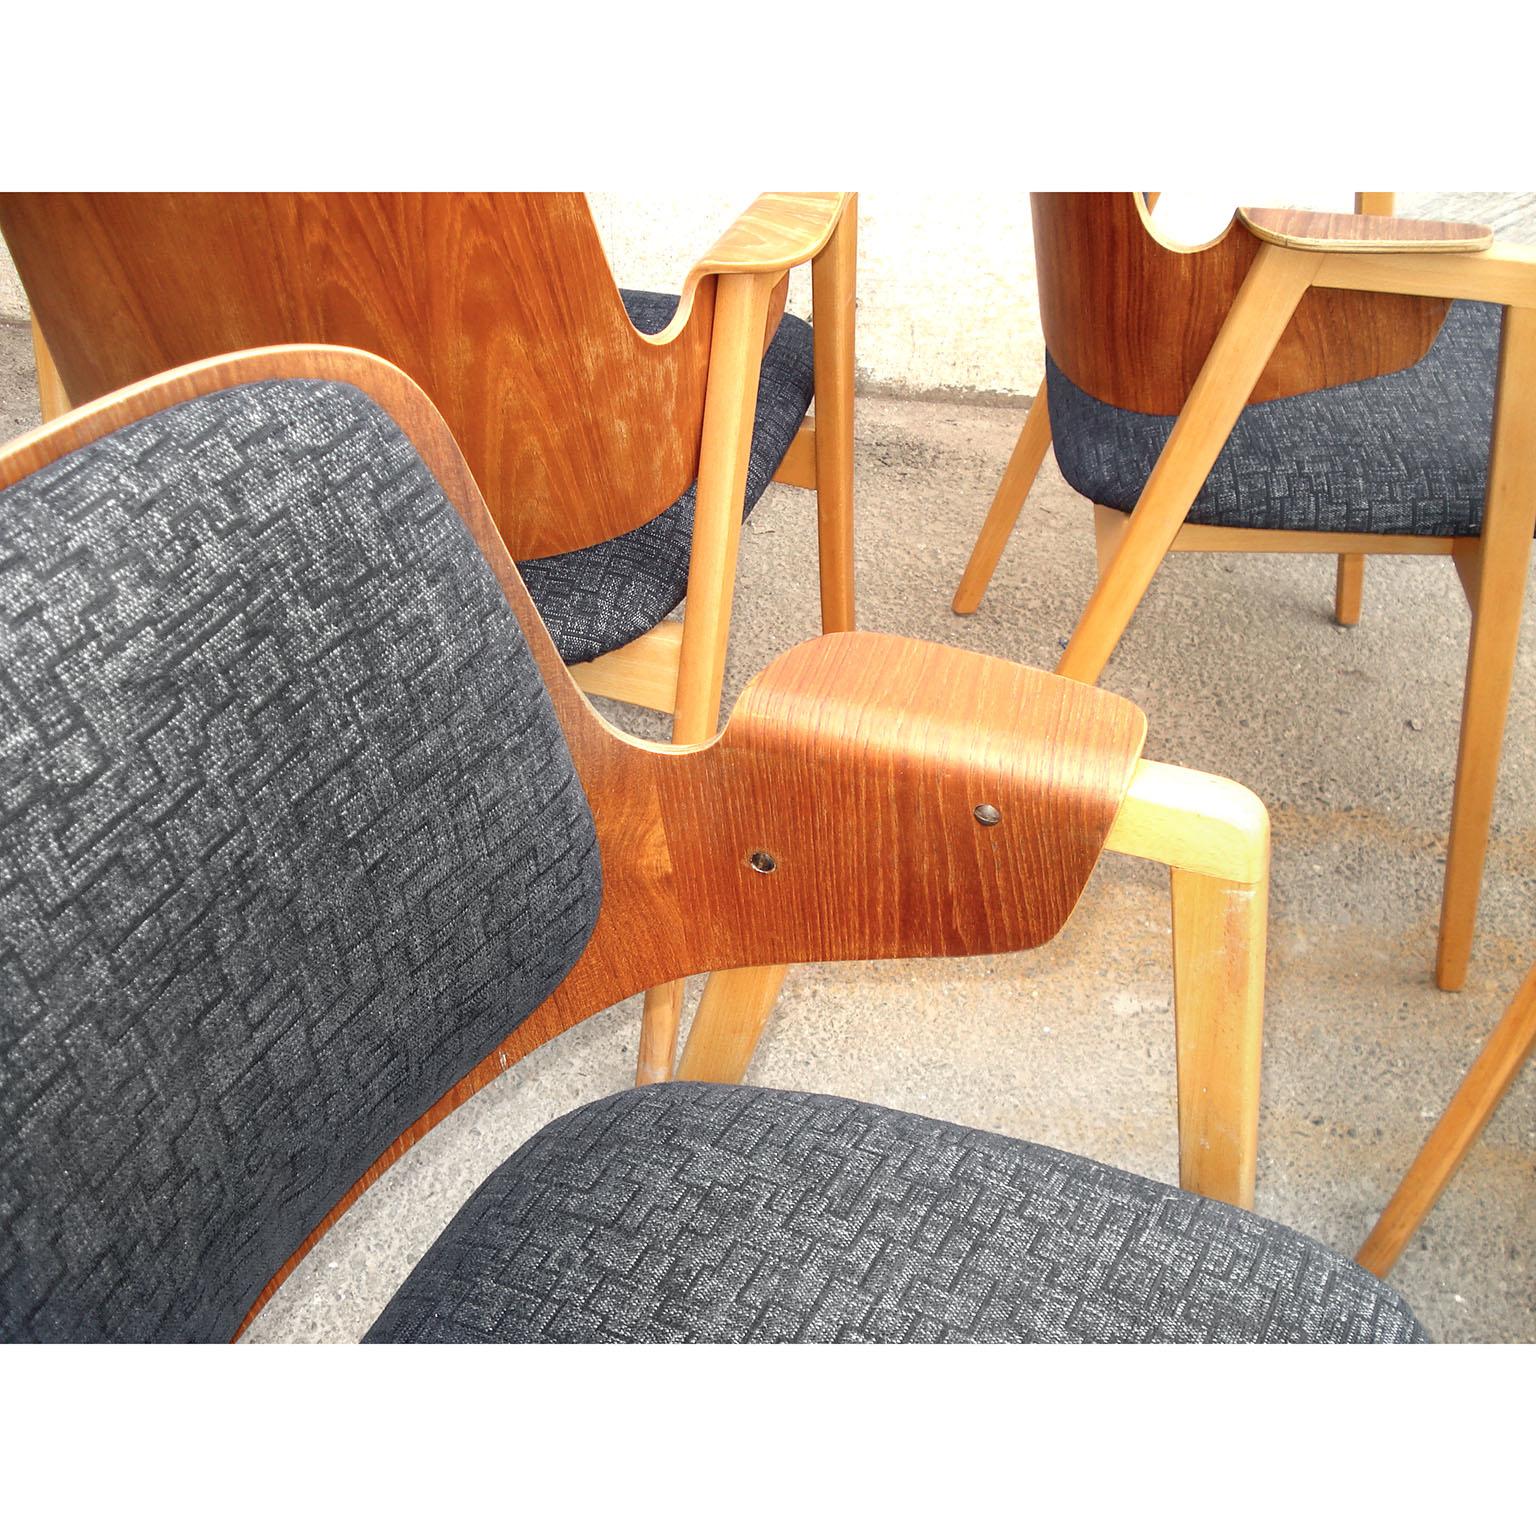 Set of 4 Elias Barup Teak Dining Chairs with Original Upholstery, 1950s Sweden For Sale 5